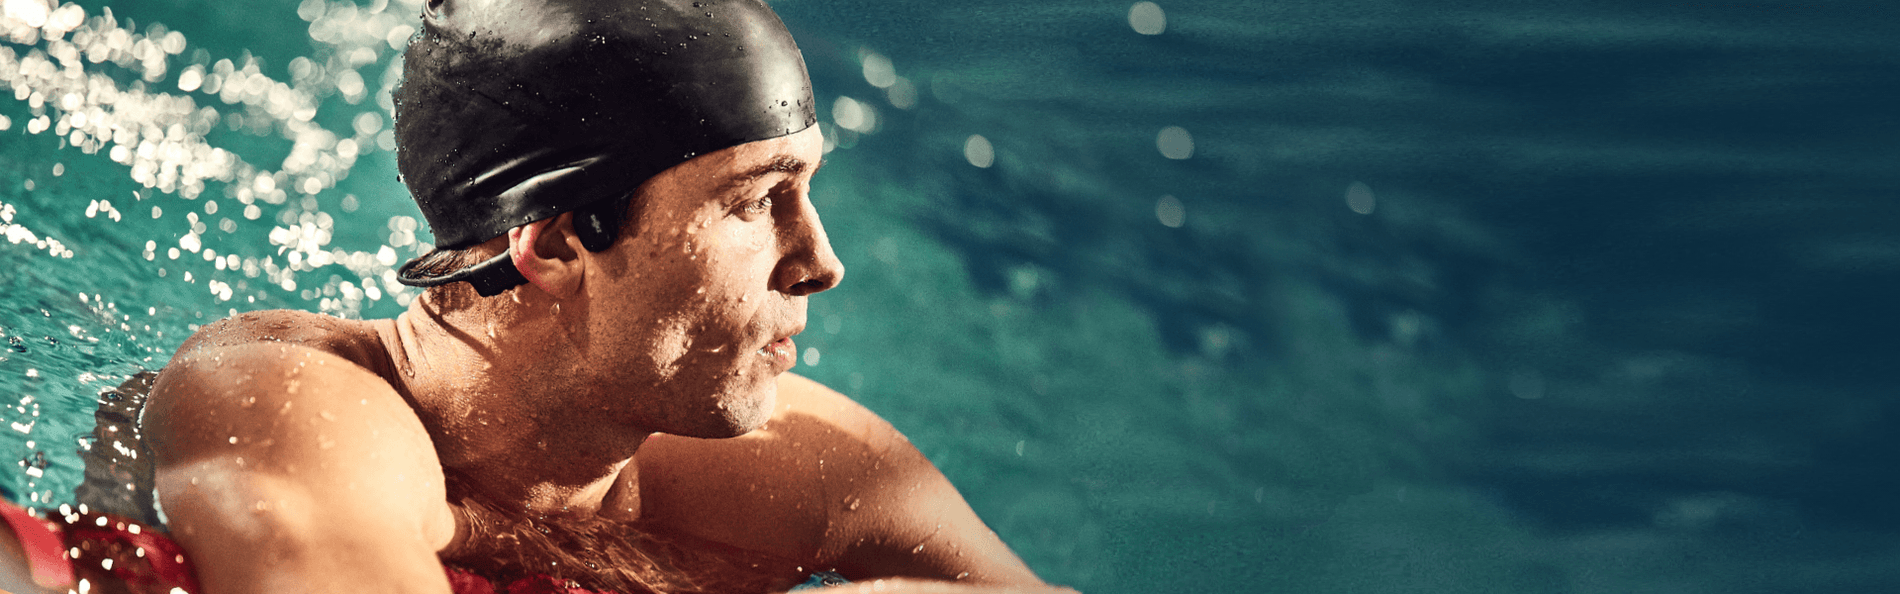 Shokz OpenSwim Pro Bone Conduction Headphones Look Like the Perfect Way to  Listen to Music While Swimming Laps